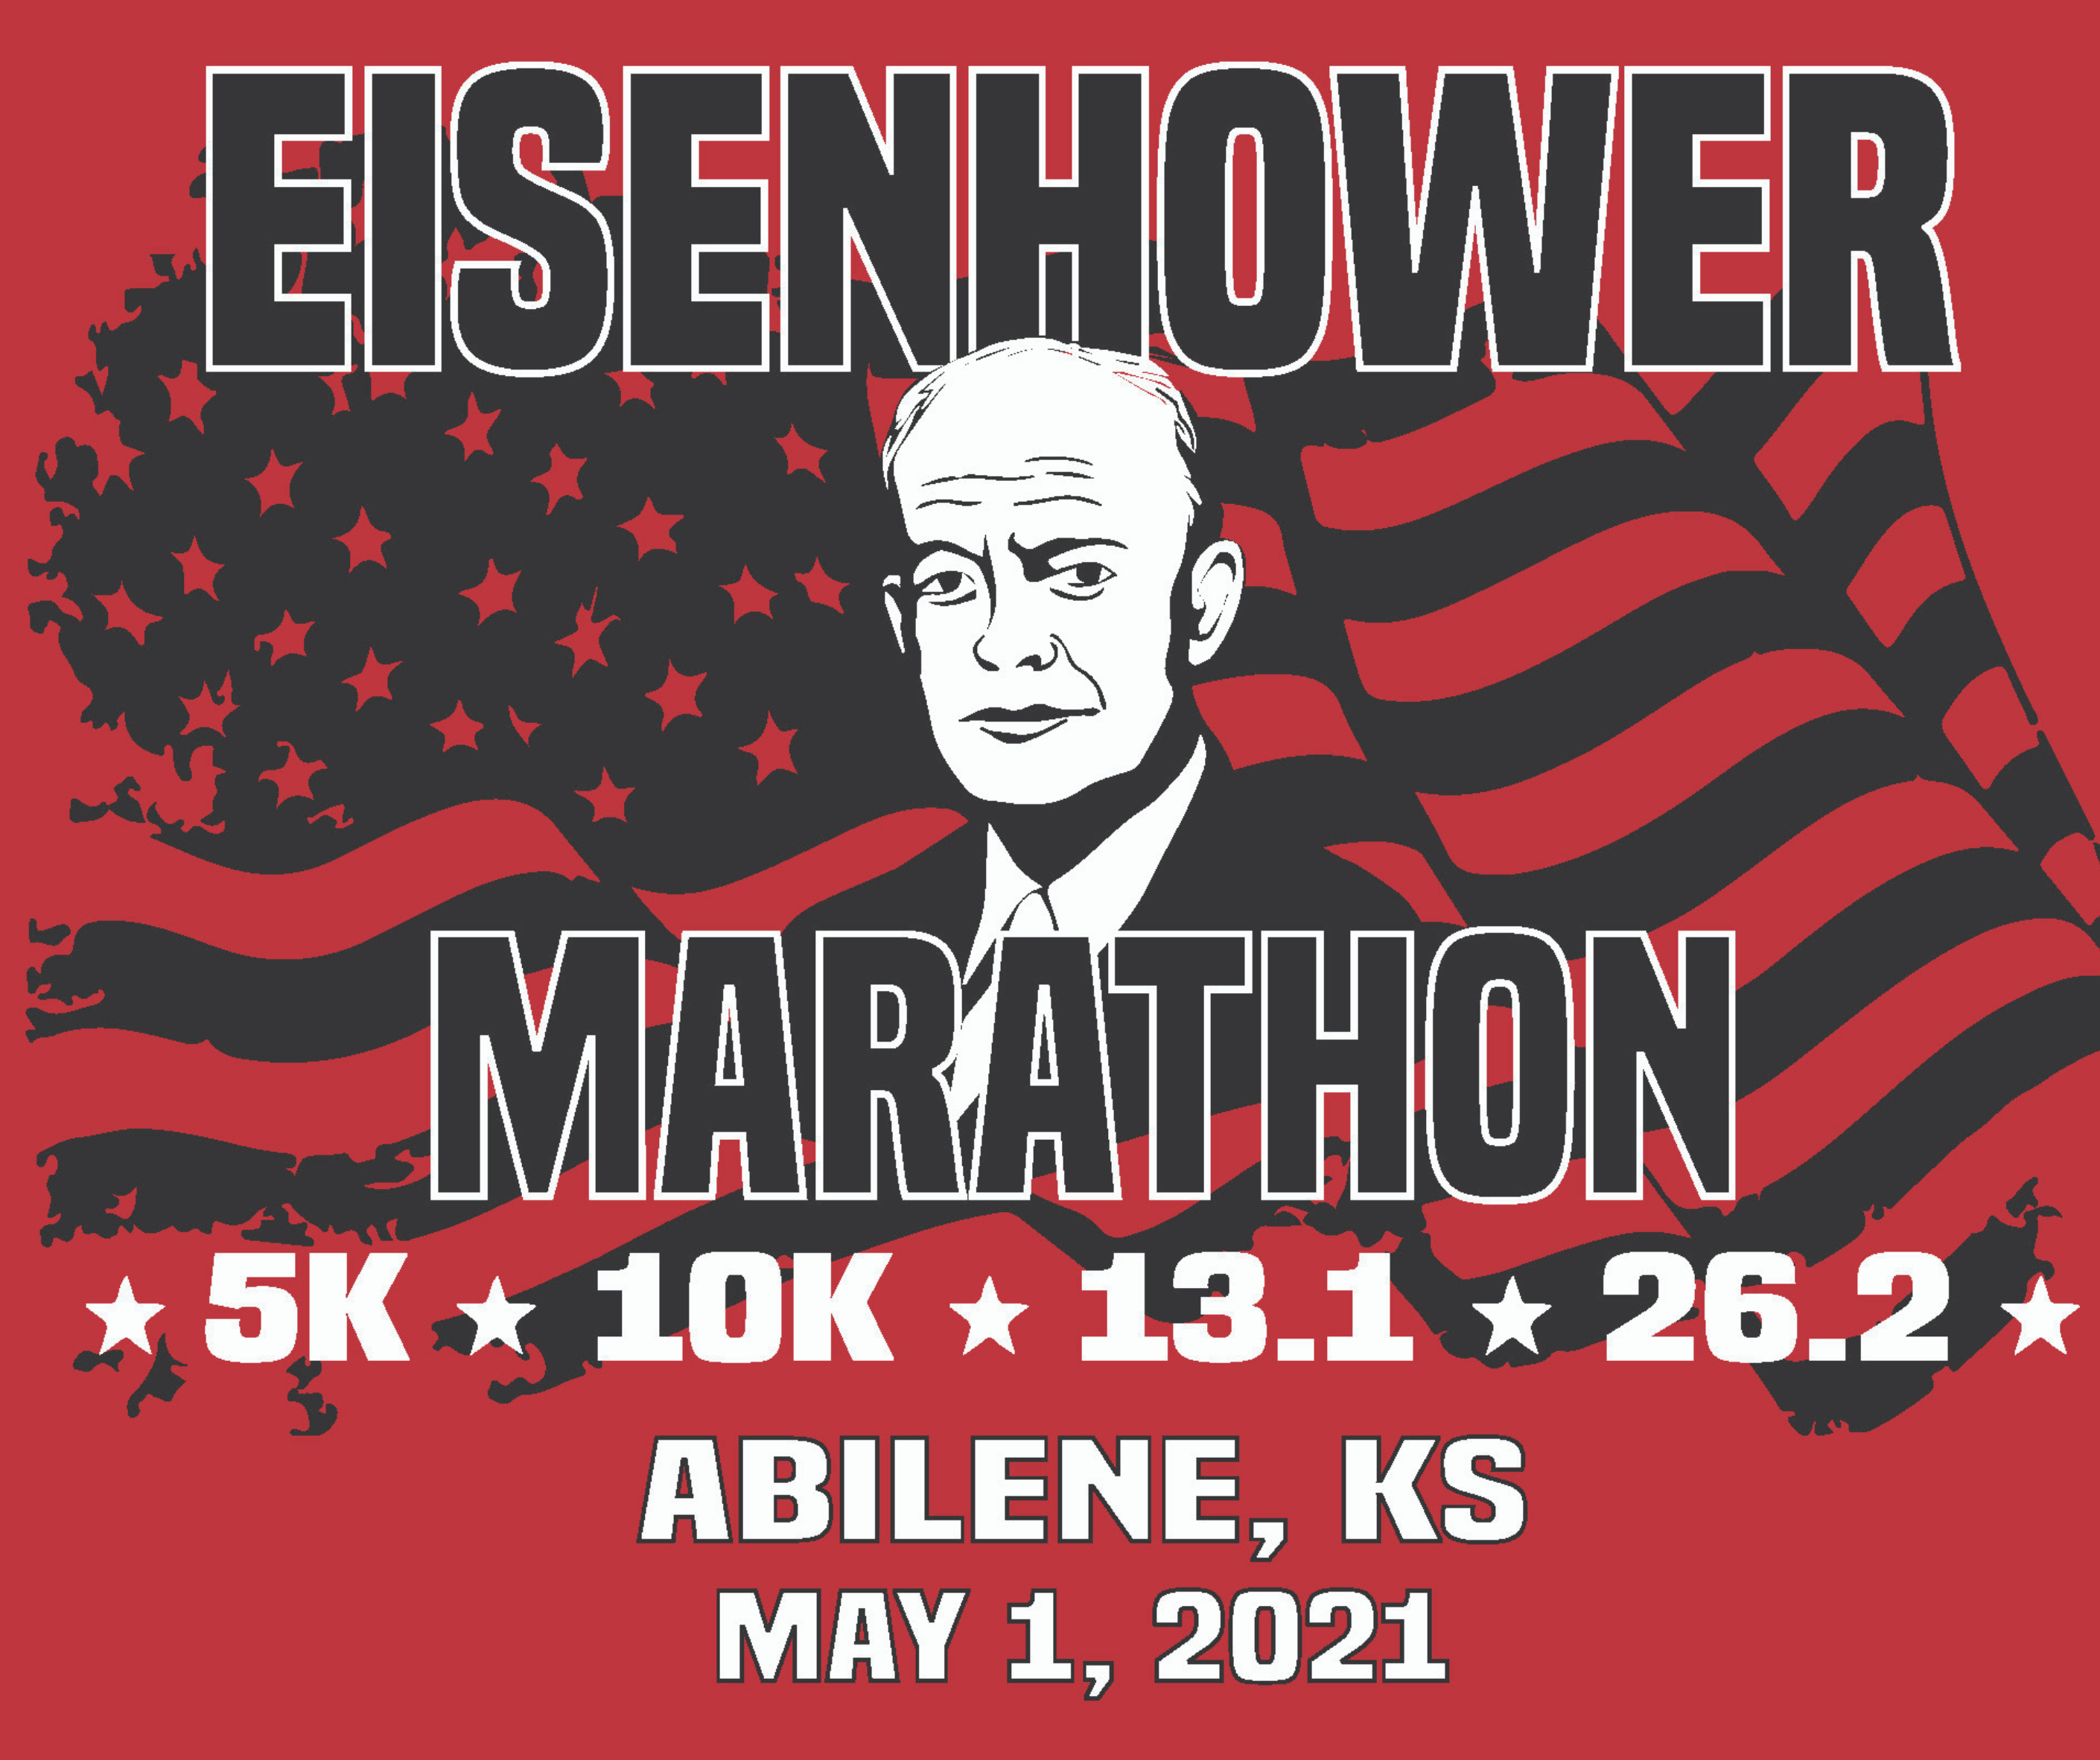 5 Things You Need to Know About the Eisenhower Marathon Visit Abilene